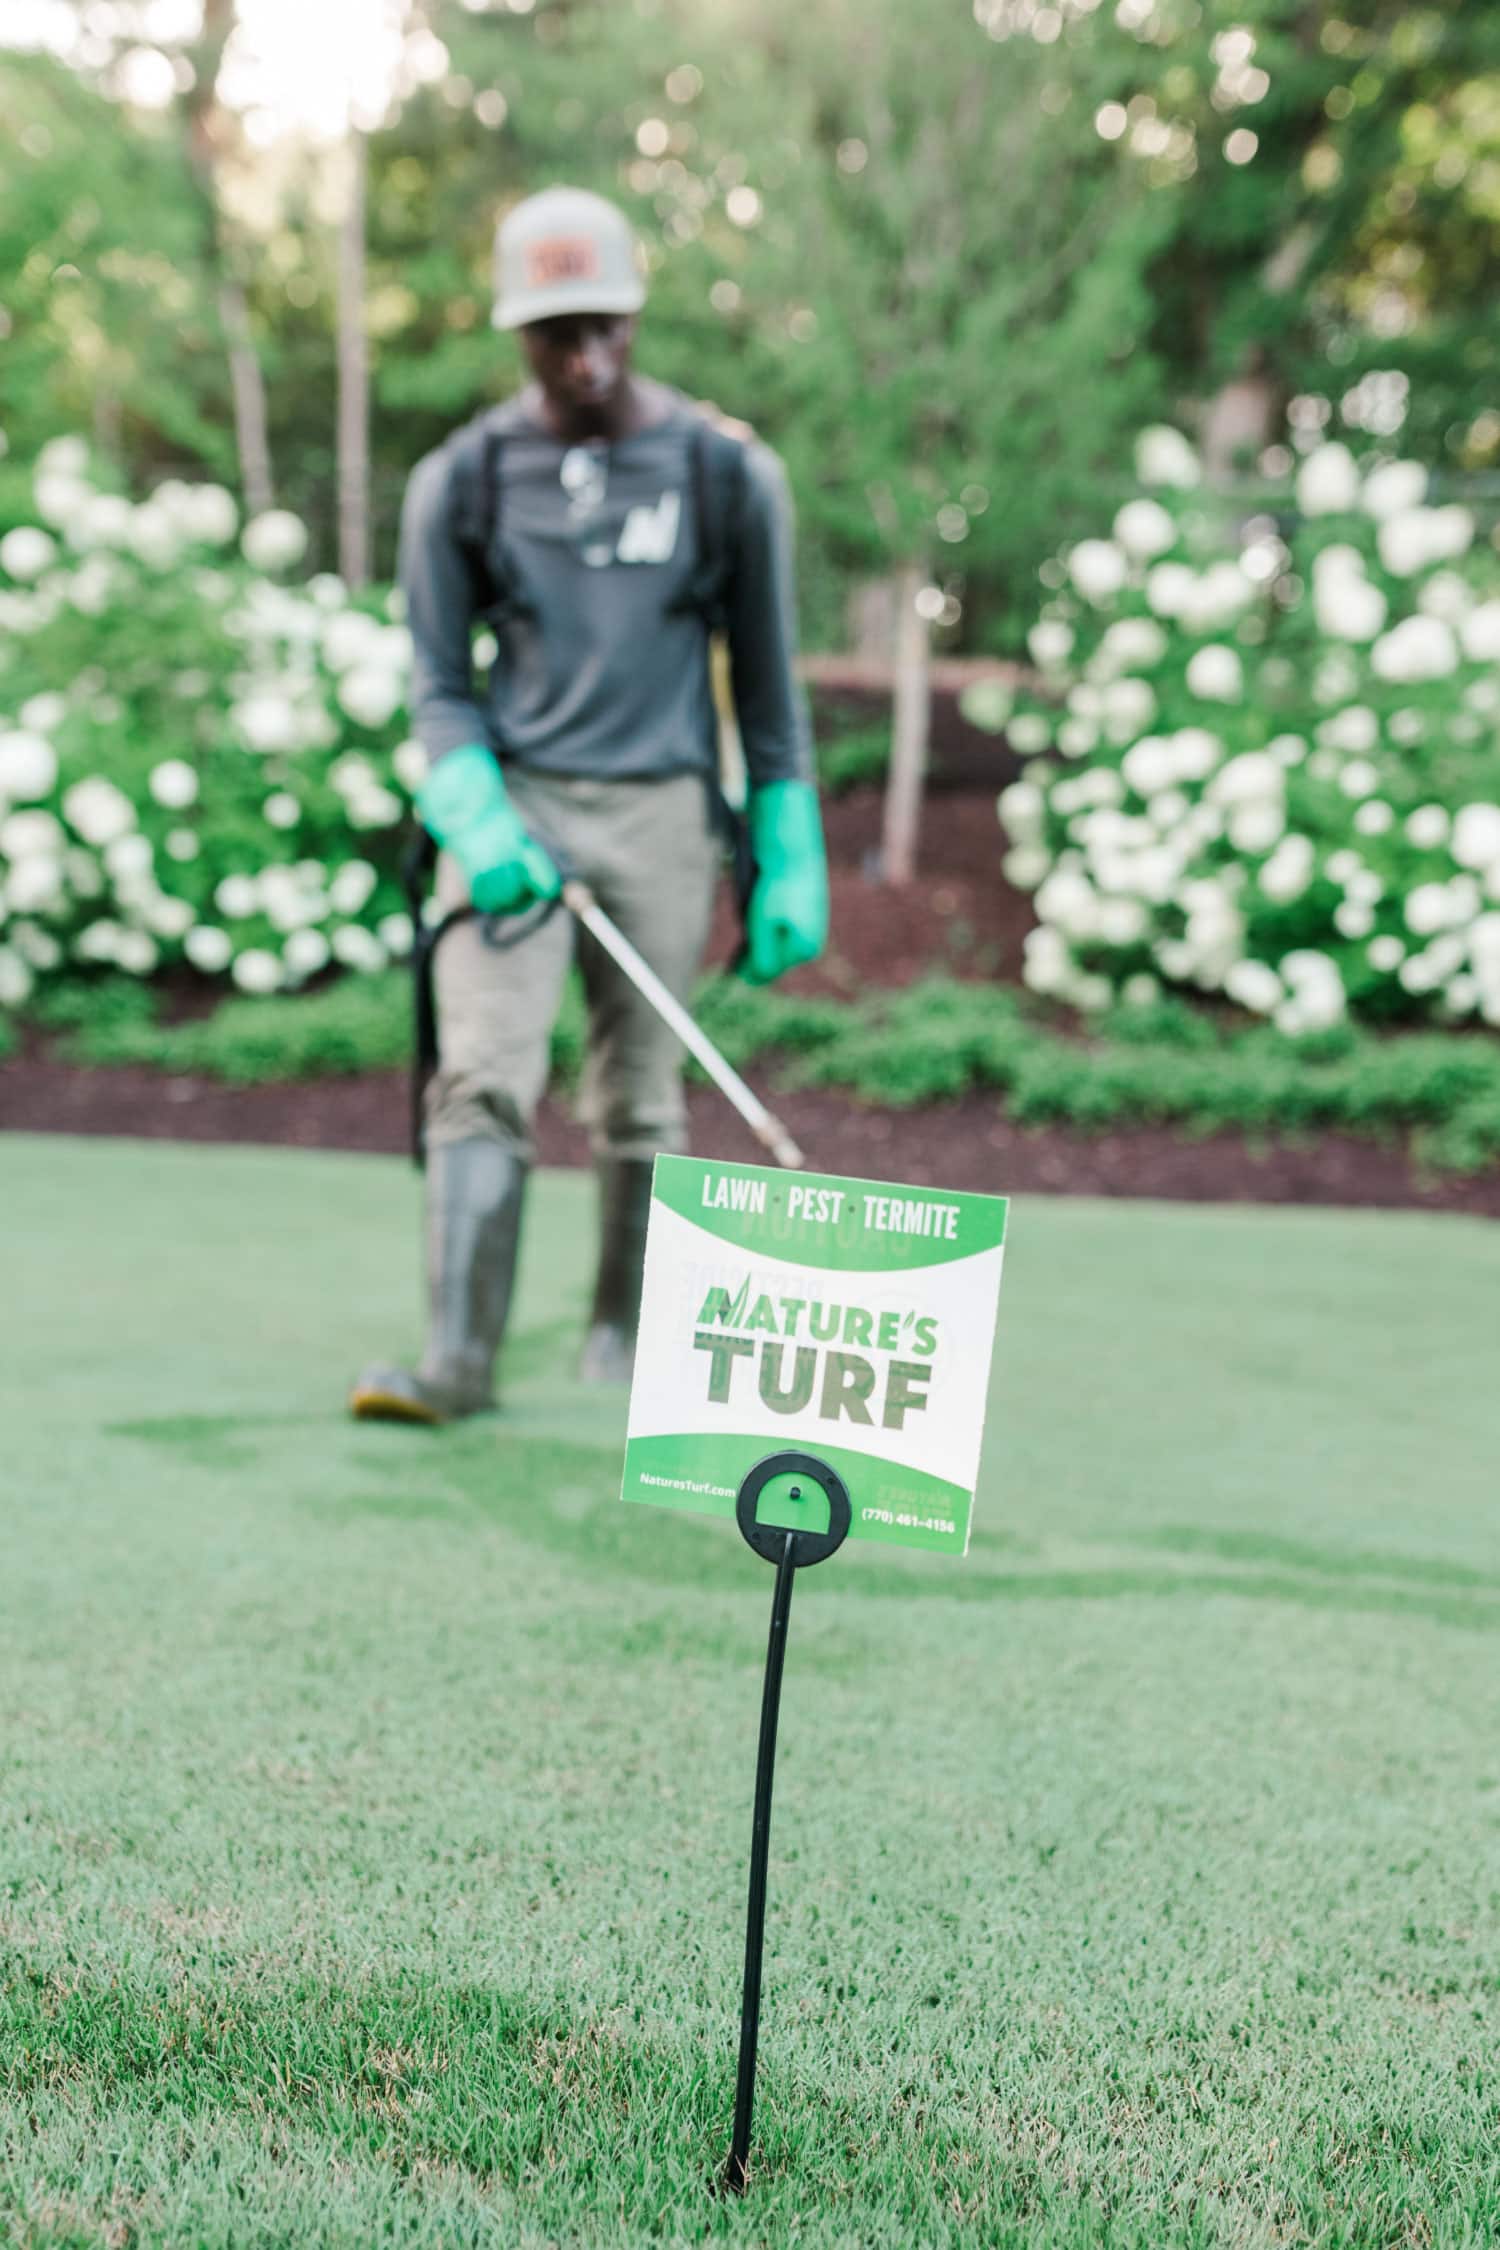 Nature’s Turf: Our Lawn Treatment Process